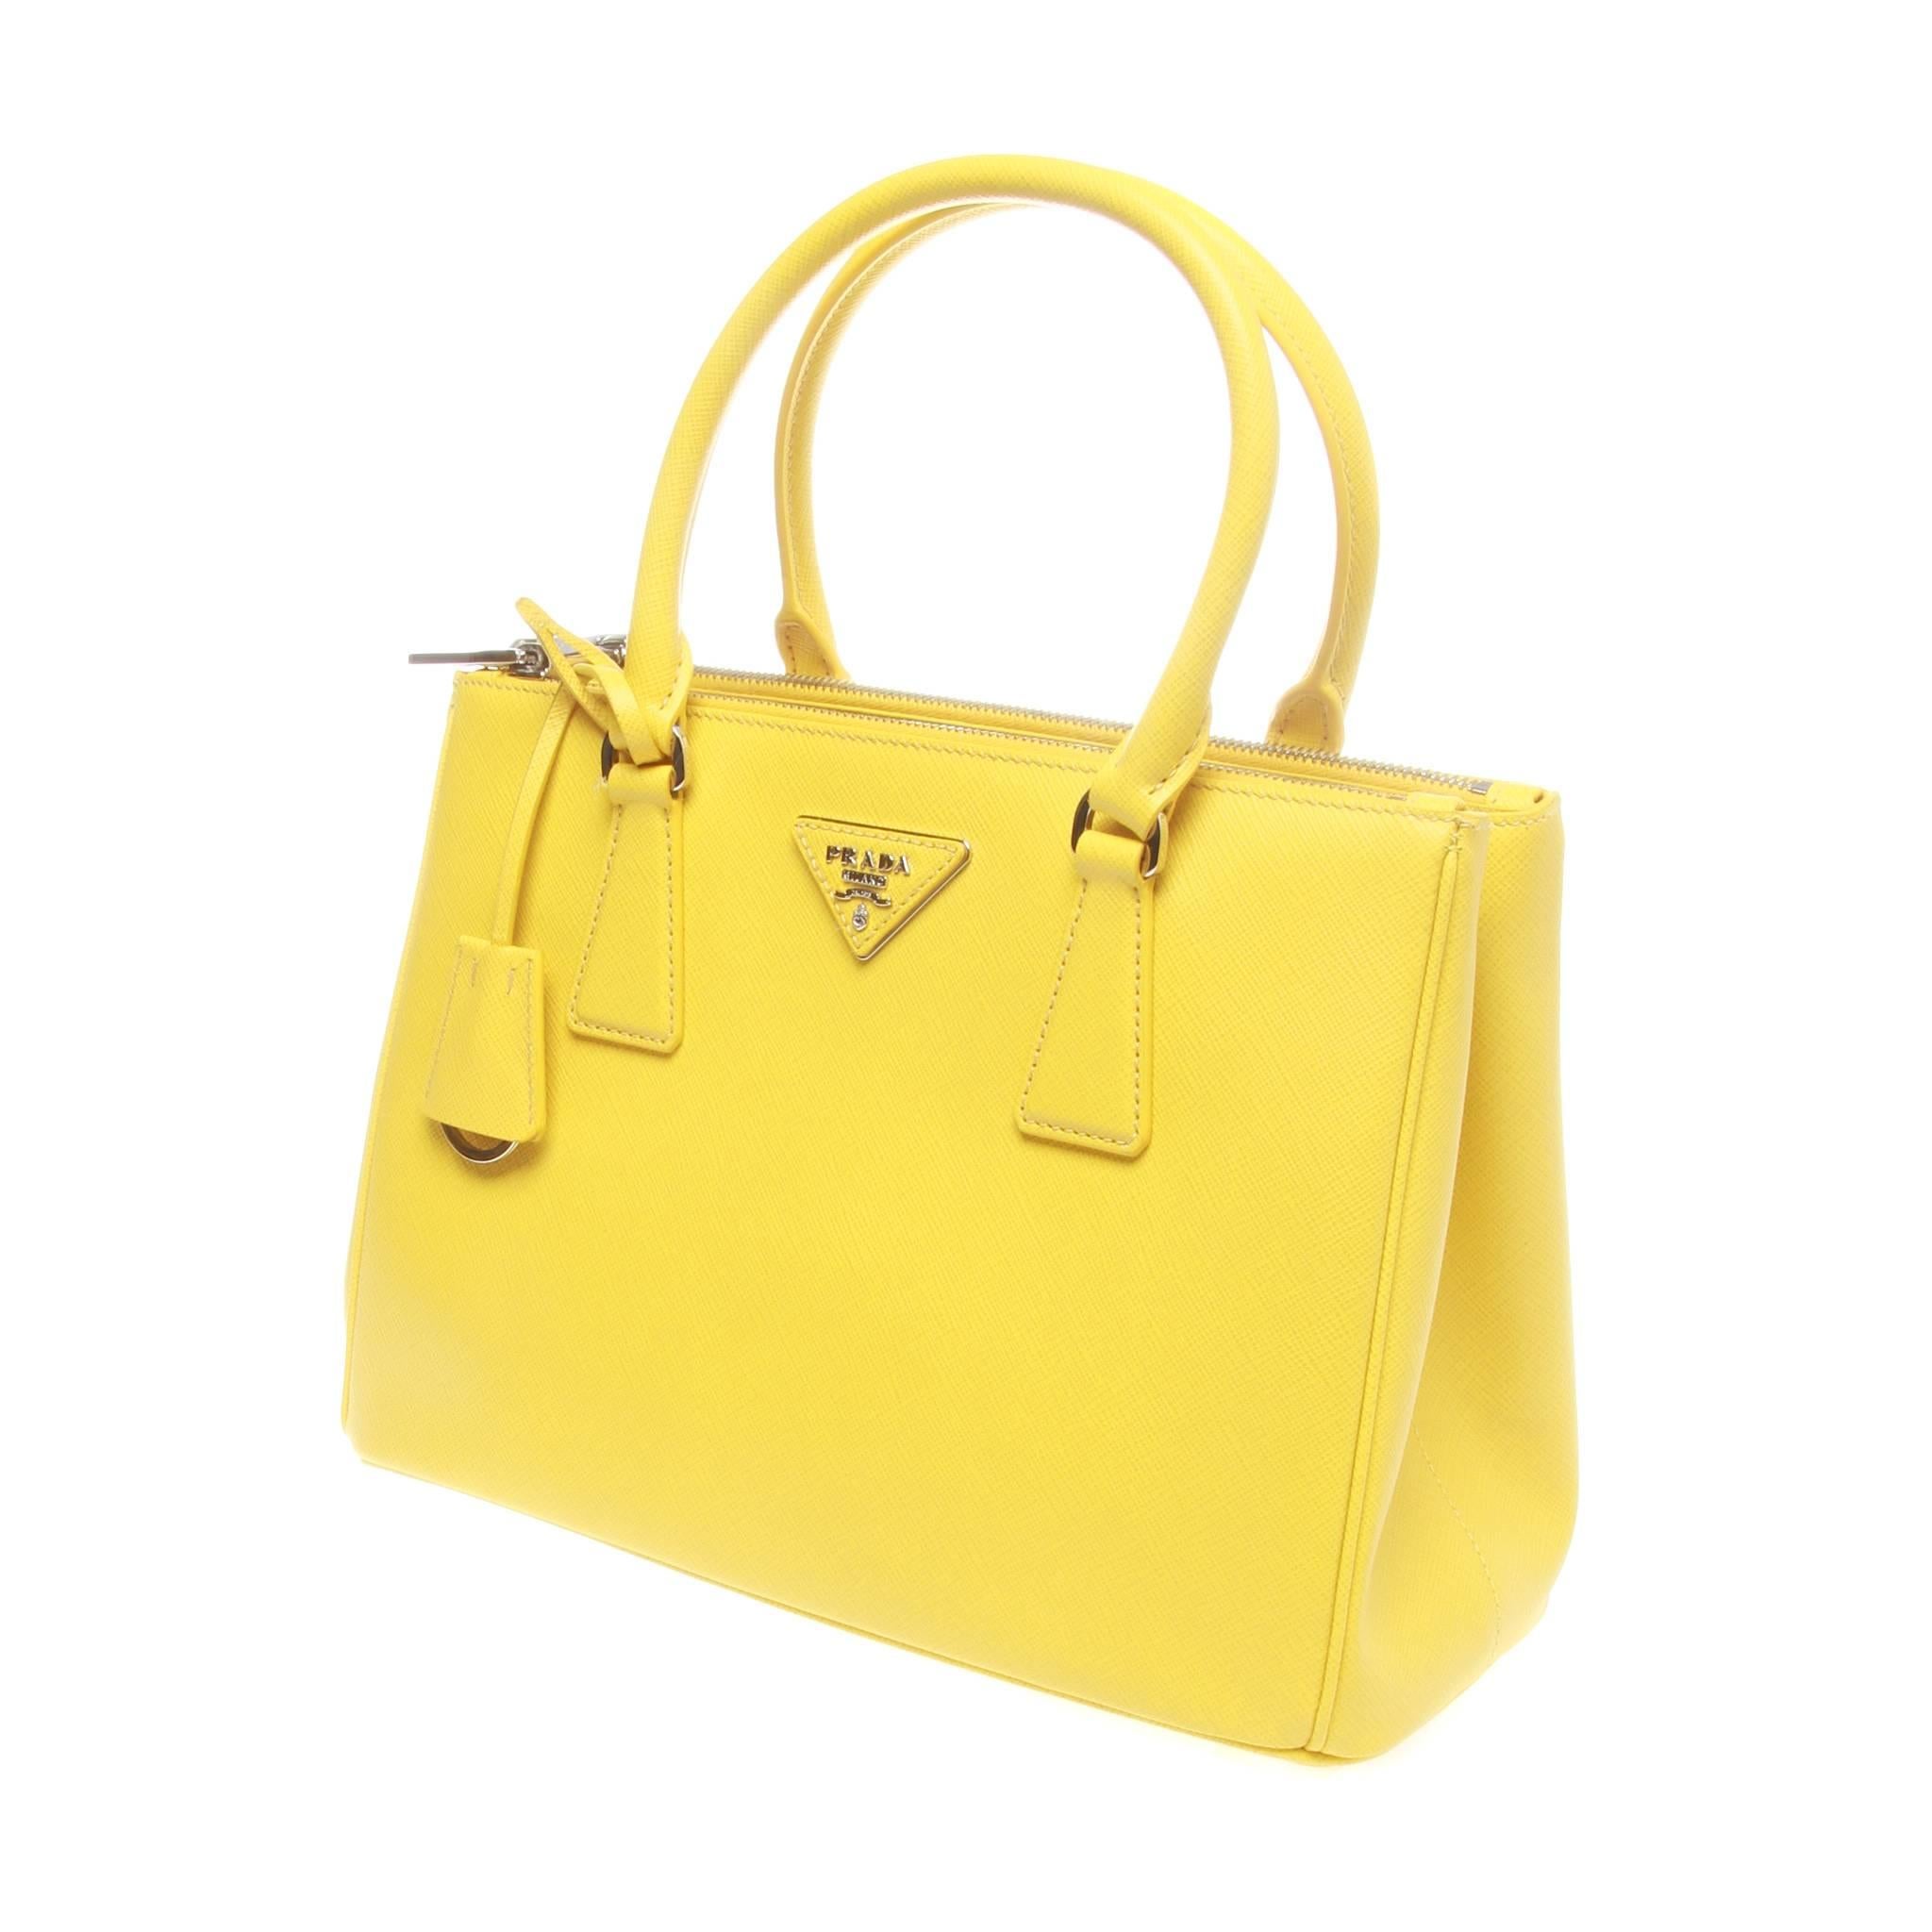 28cm Prada Galleria shopping bag in yellow saffiano lux leather. Featuring silver-tone hardware, dual rolled top handles, single adjustable shoulder strap, logo placard at front face, dual snap expansions at sides, protective feet at base, tonal